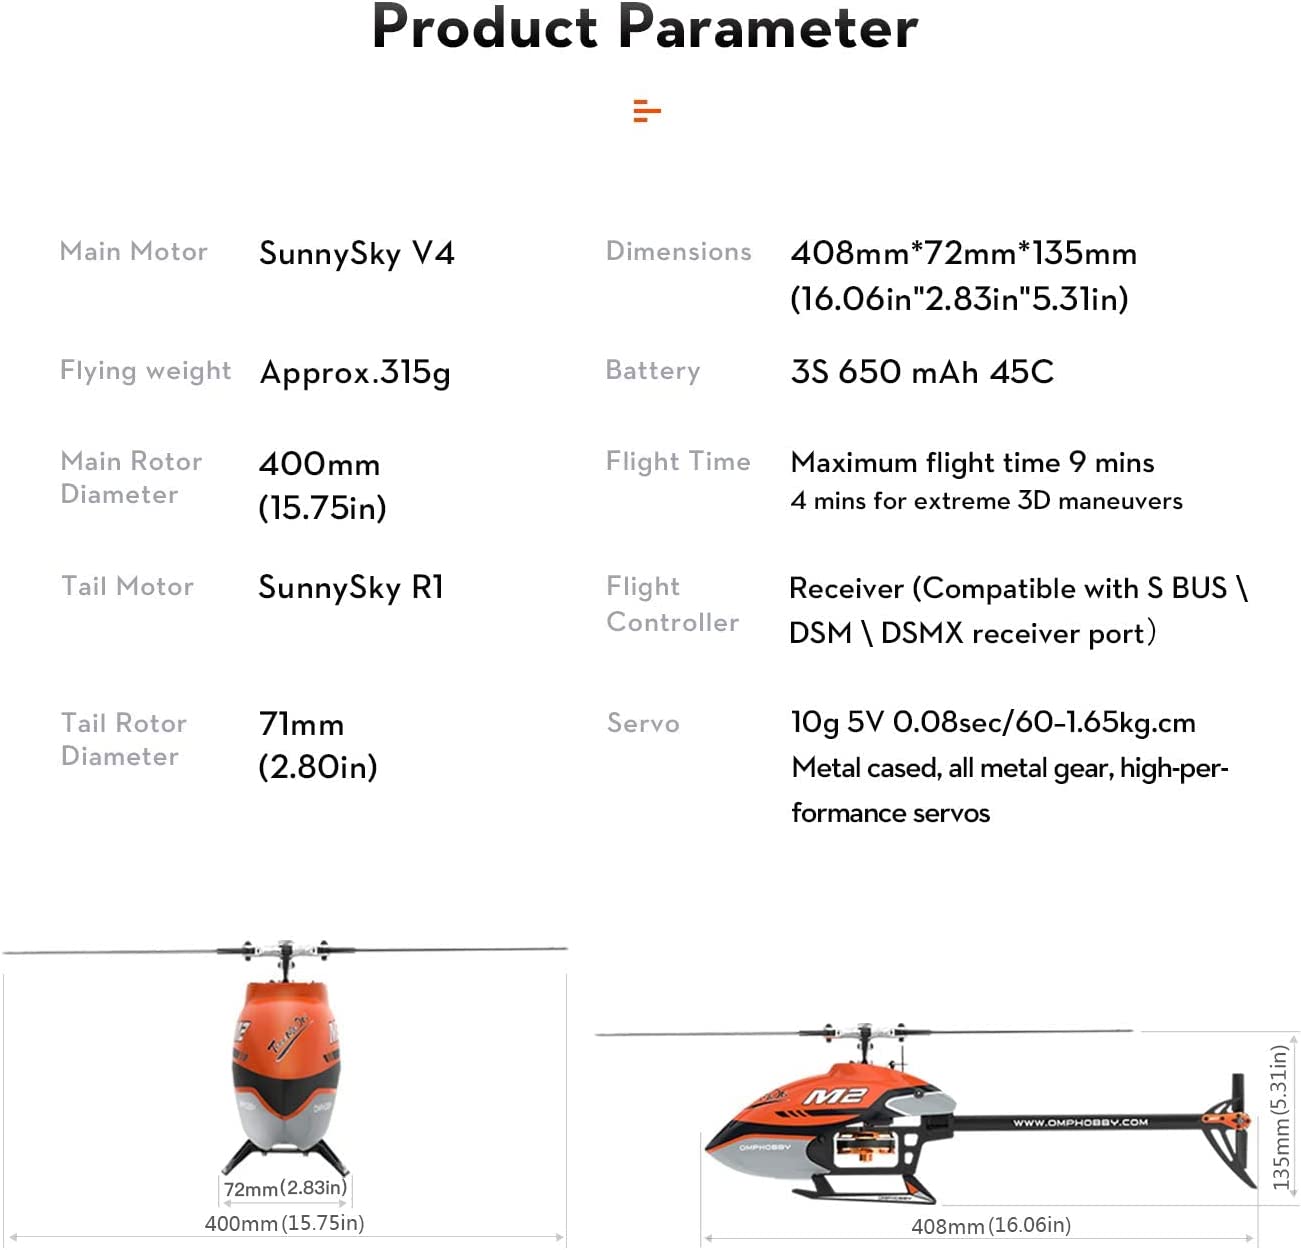 Omphobby M2 V2 Electric Helicopter BNF (Orange) 400mm